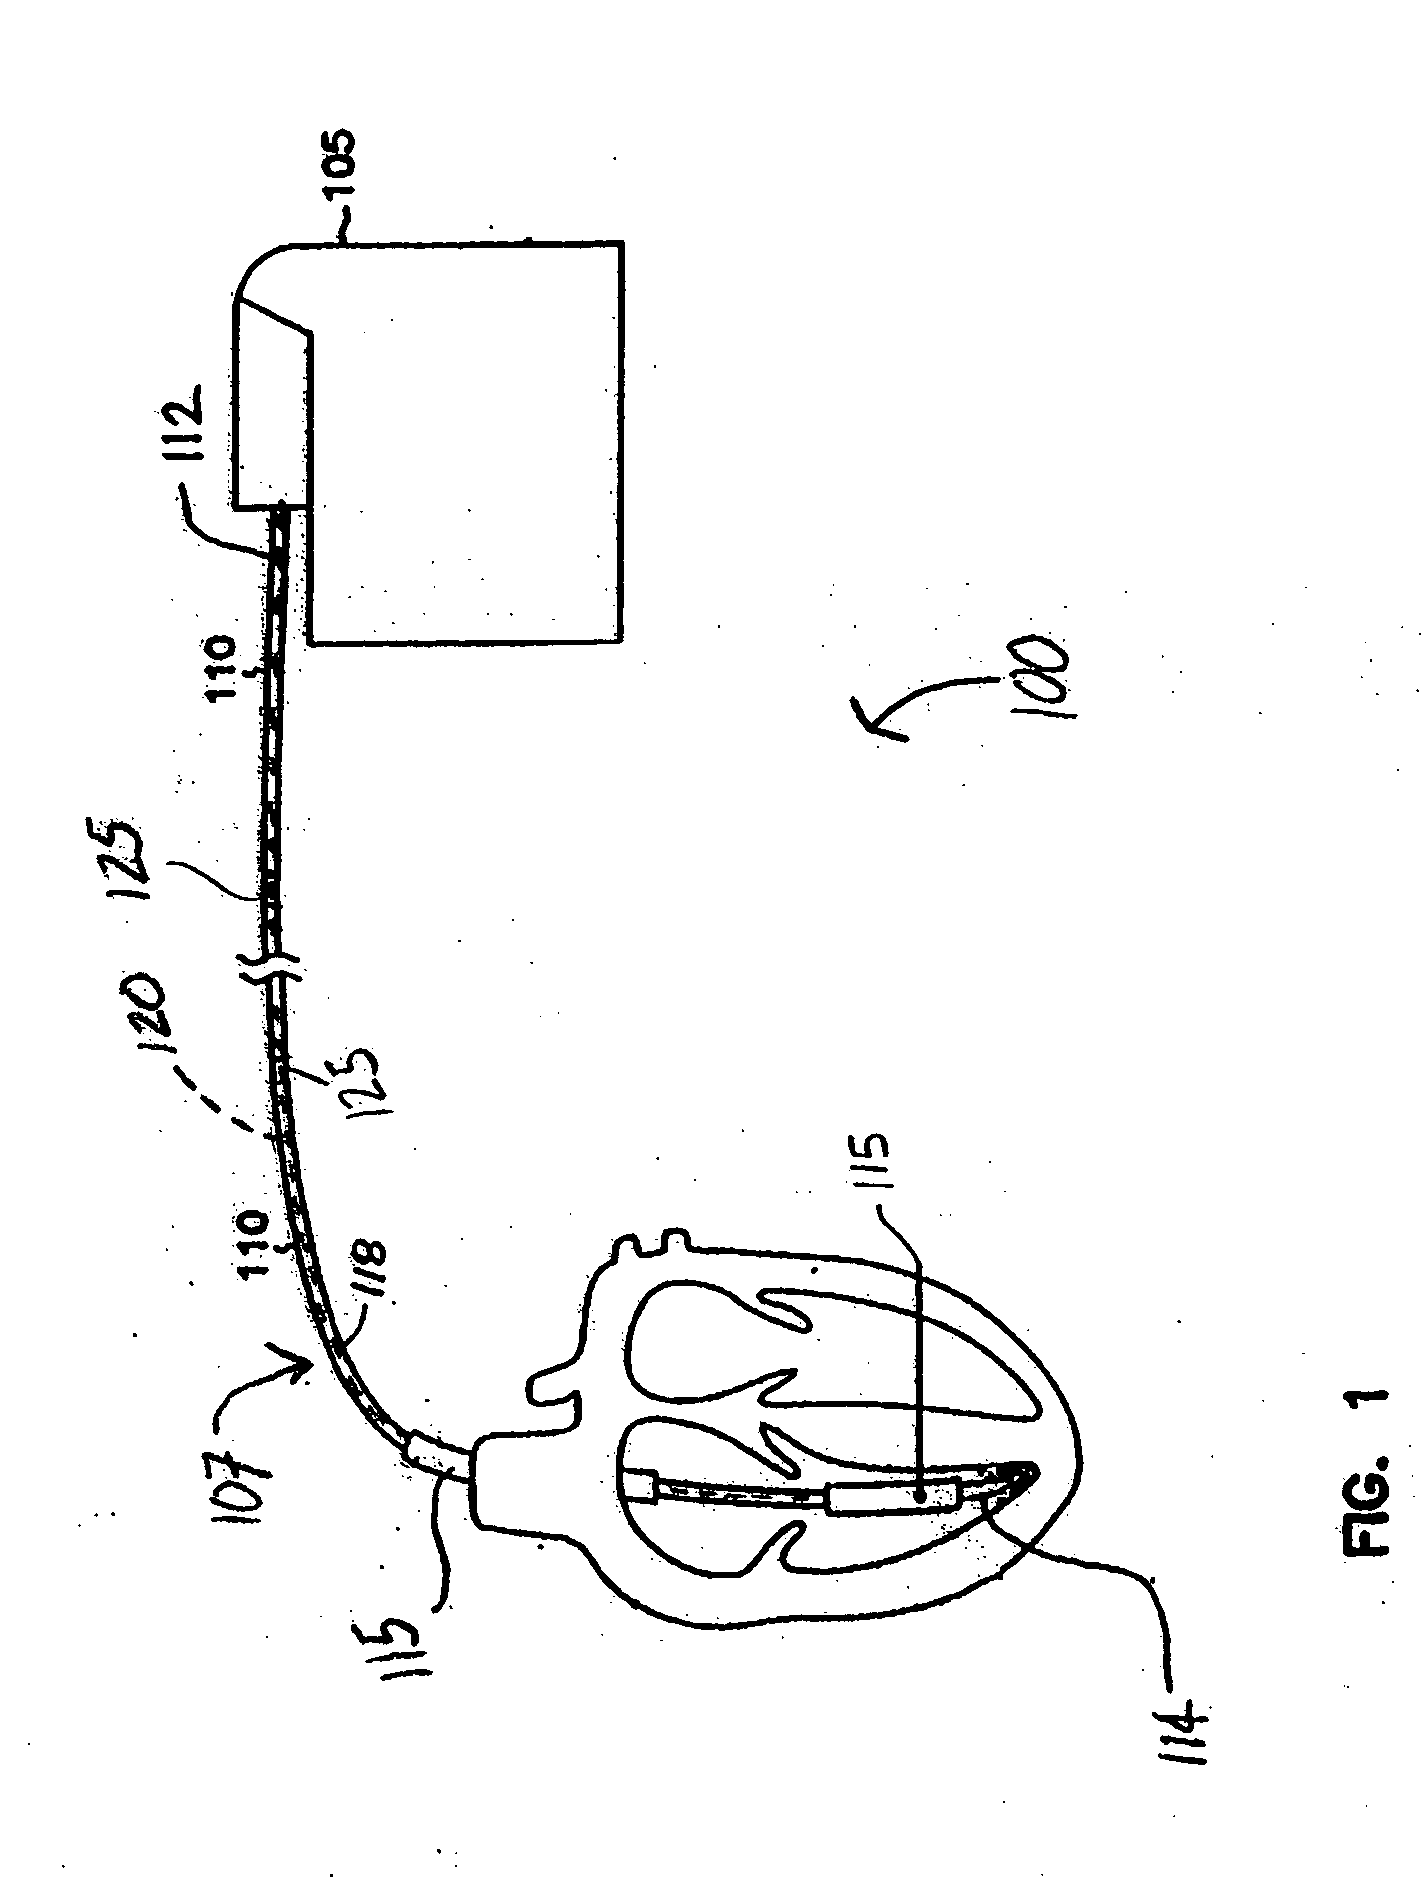 Systems and methods for characterizing leads